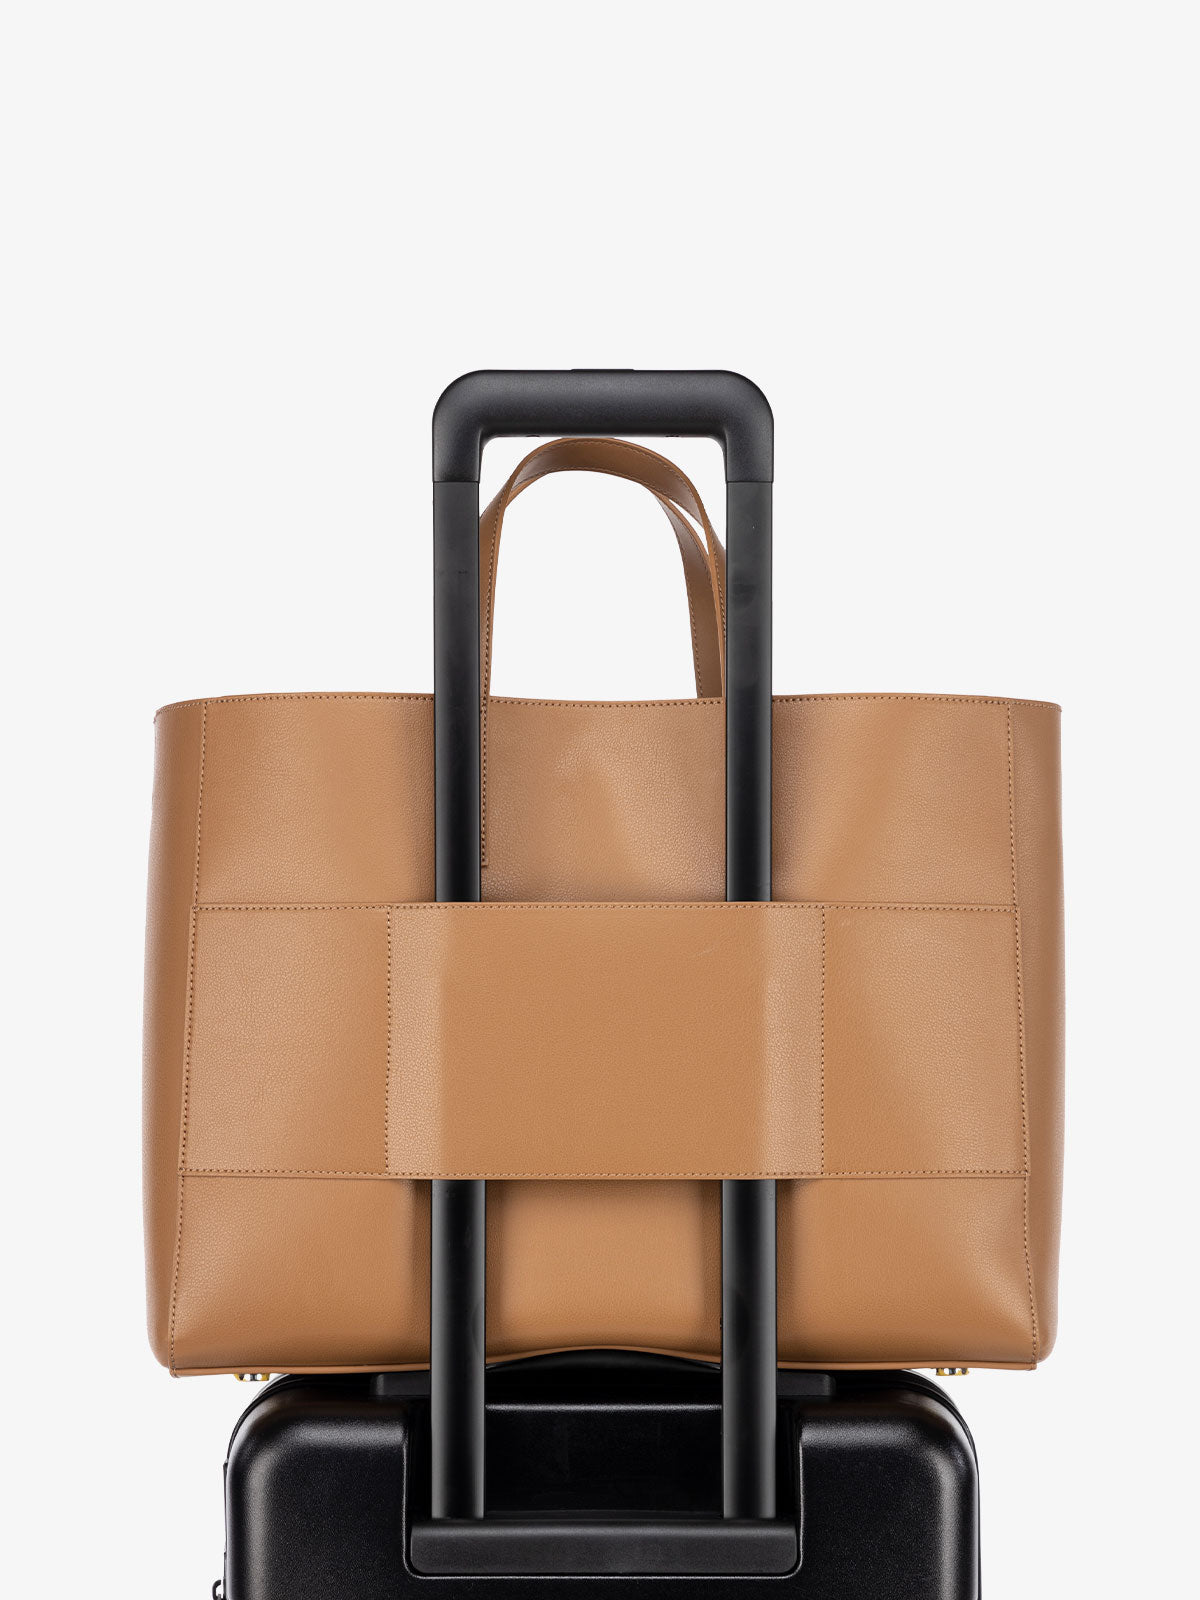 I don't need another tote but this bag has been on my wishlist all yea, Tote  Bag